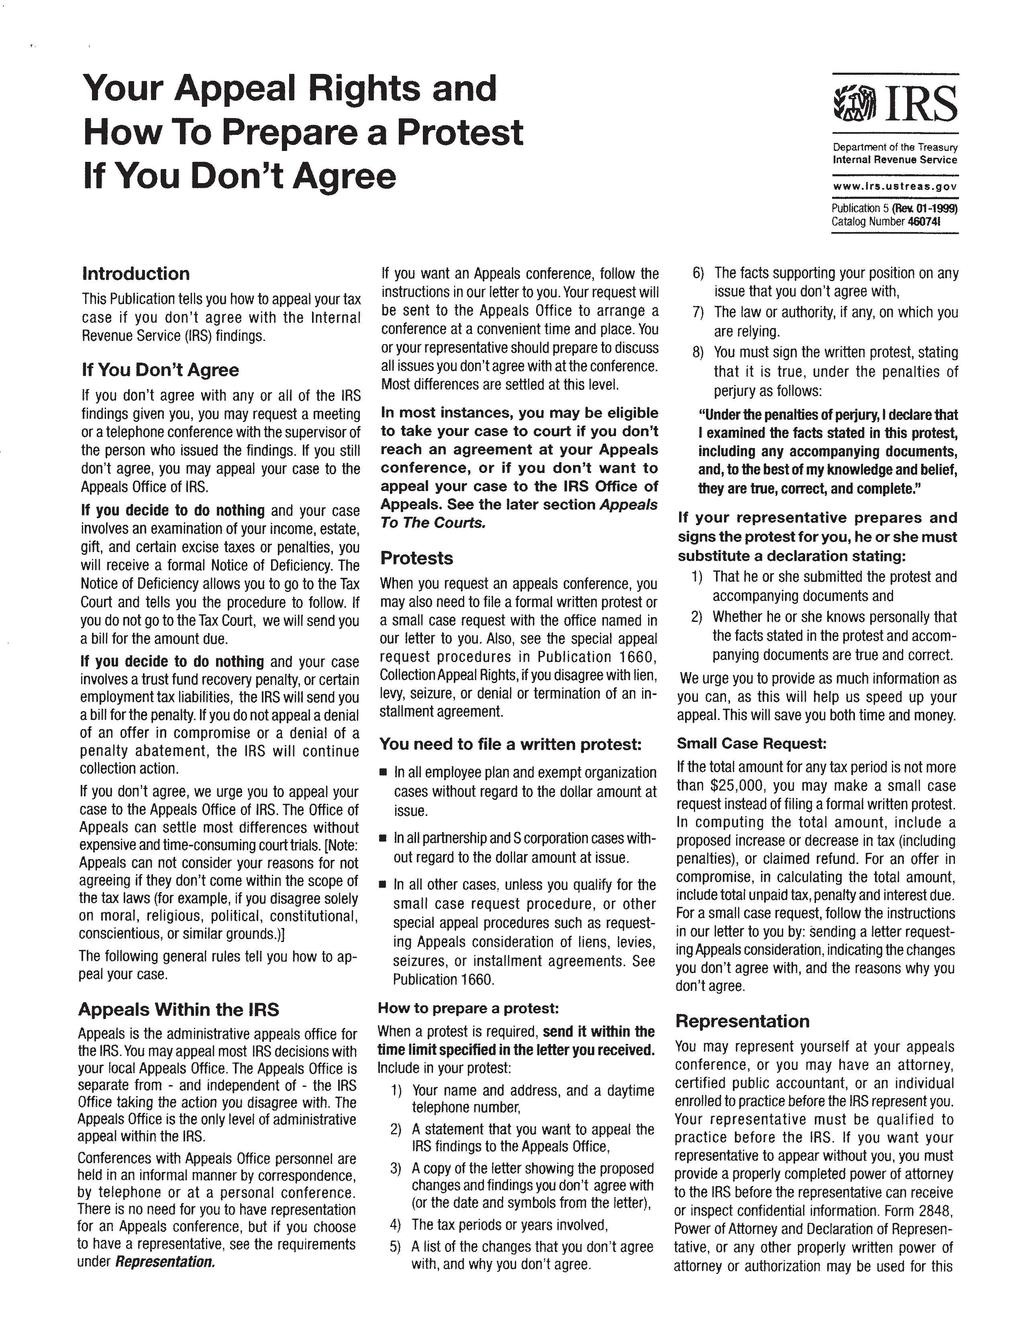 Your Appeal Rights and How To Prepare a Protest If You Don't Agree fj)irs Department of the Treasury Internal Revenue Service www.lrs.ustreas.gov Publication 5 (Rev.